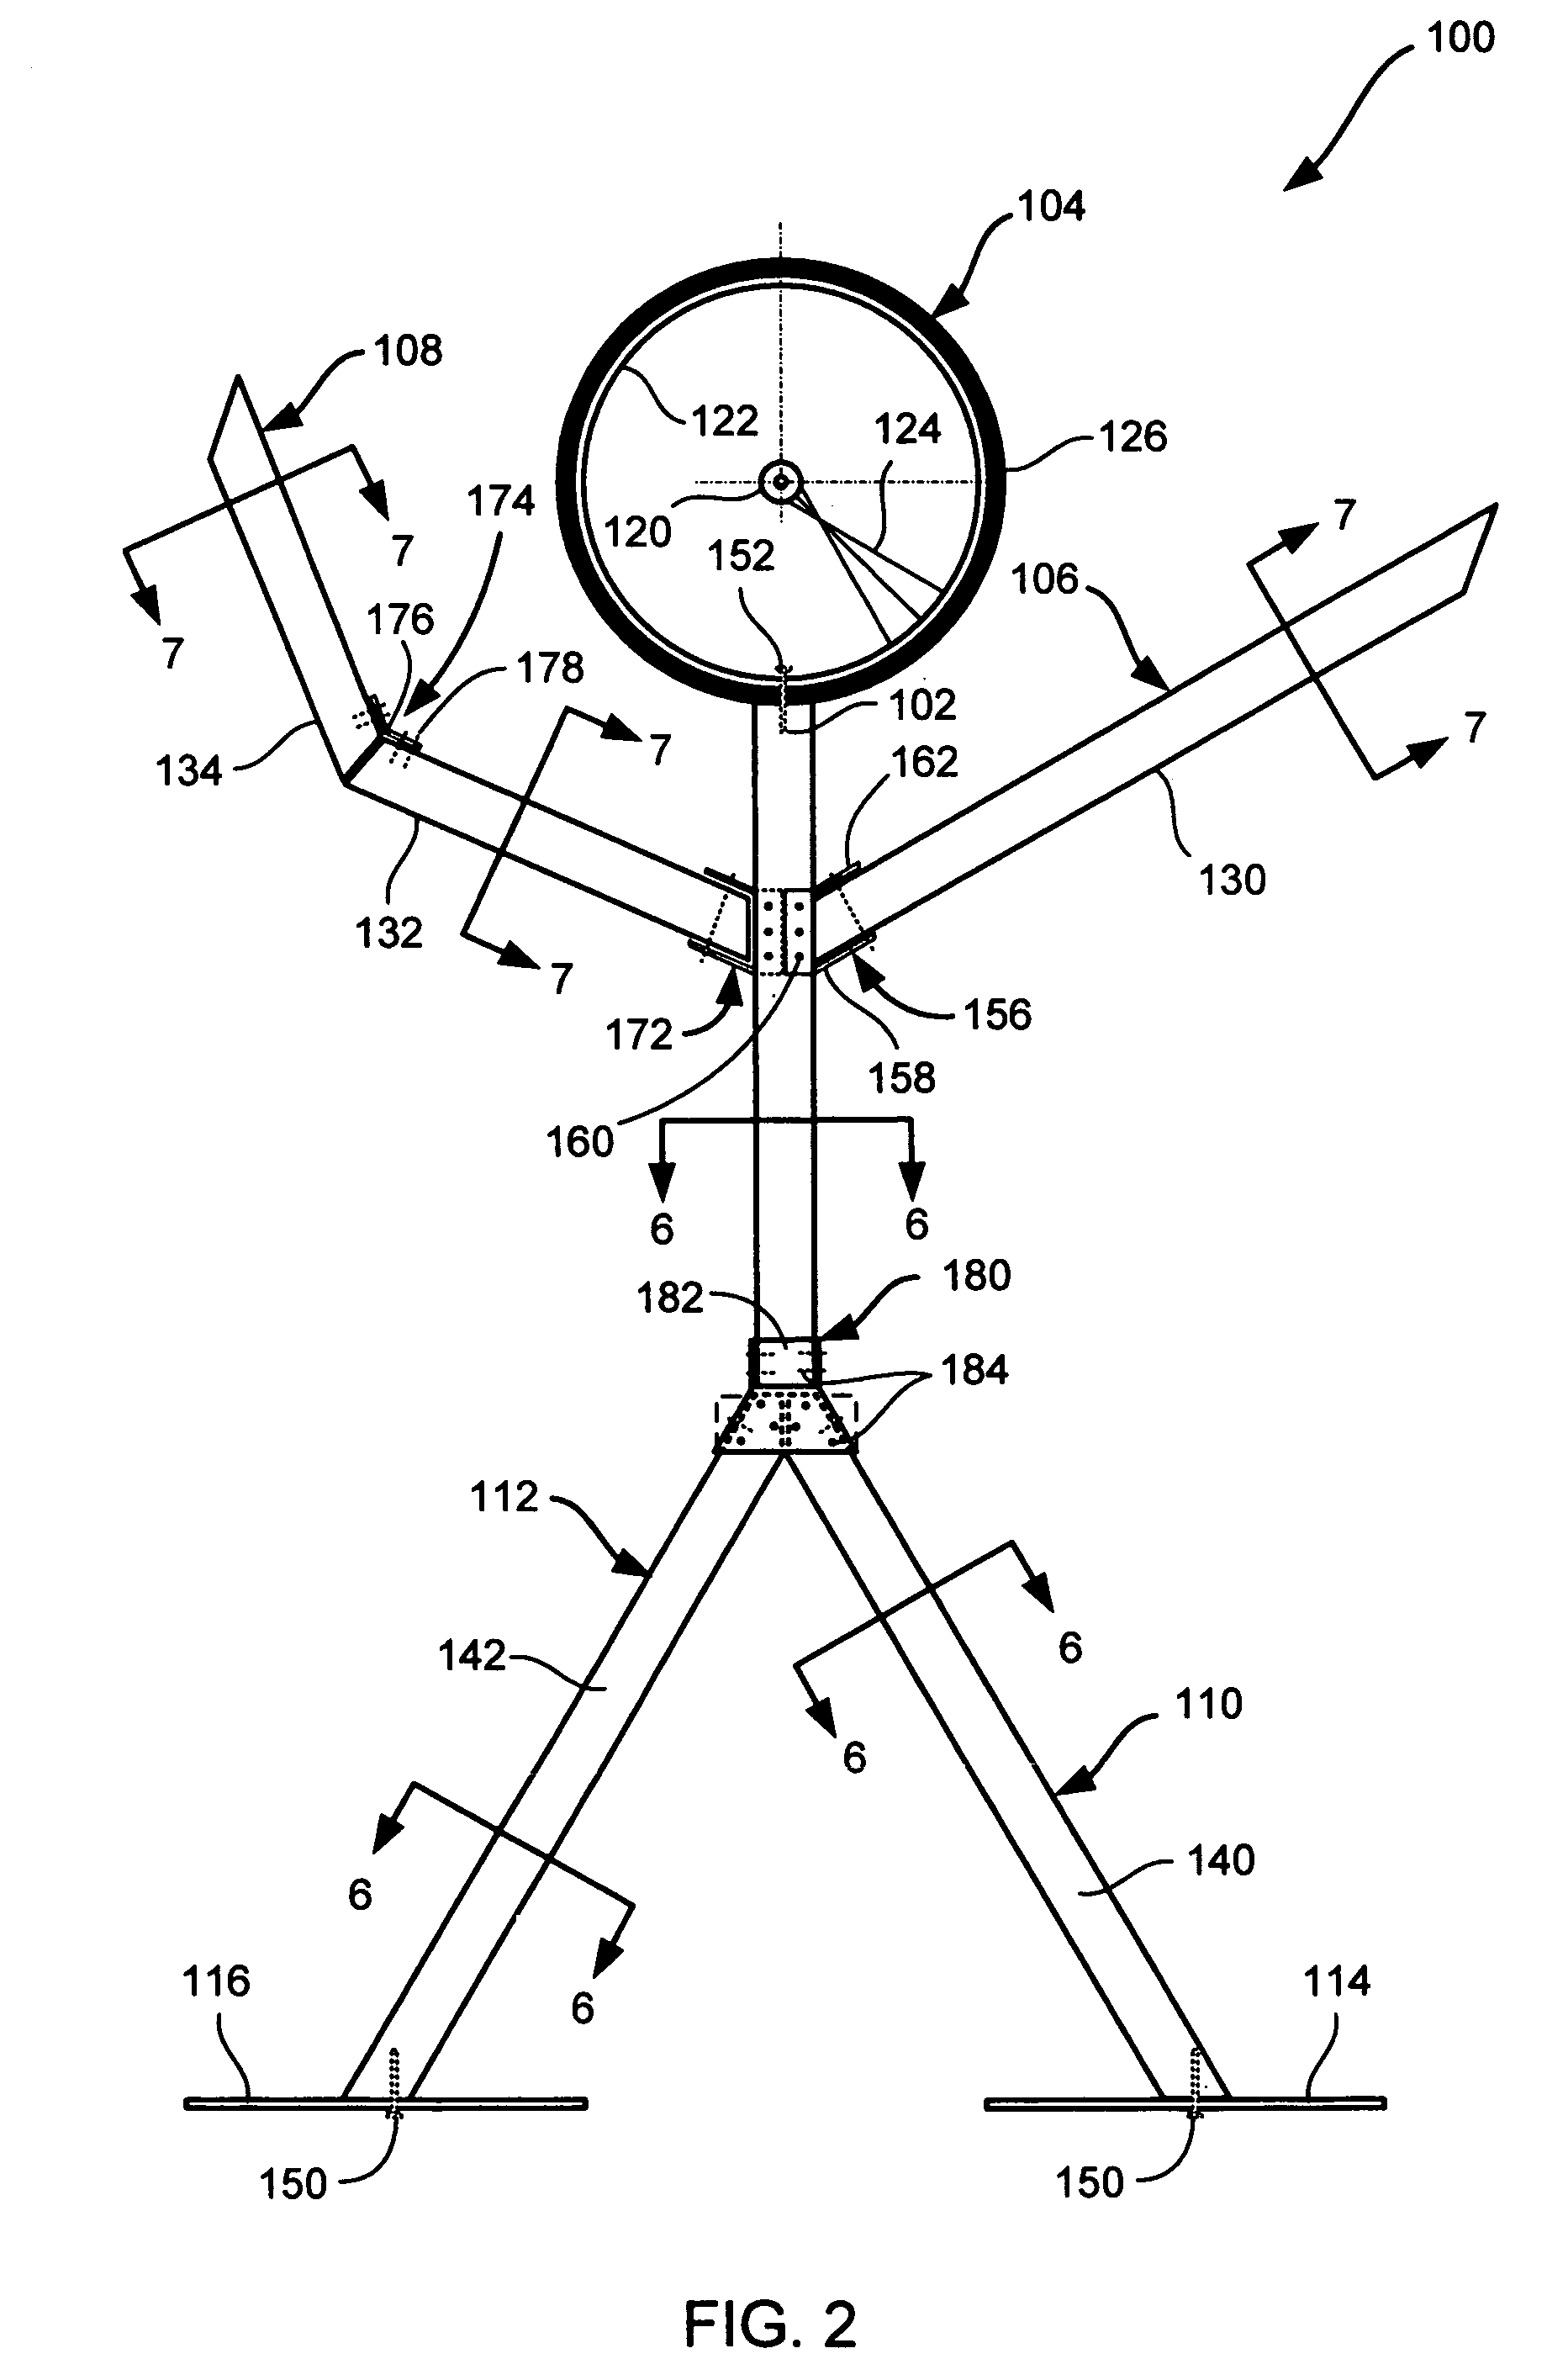 Structure for conveying information to an observer